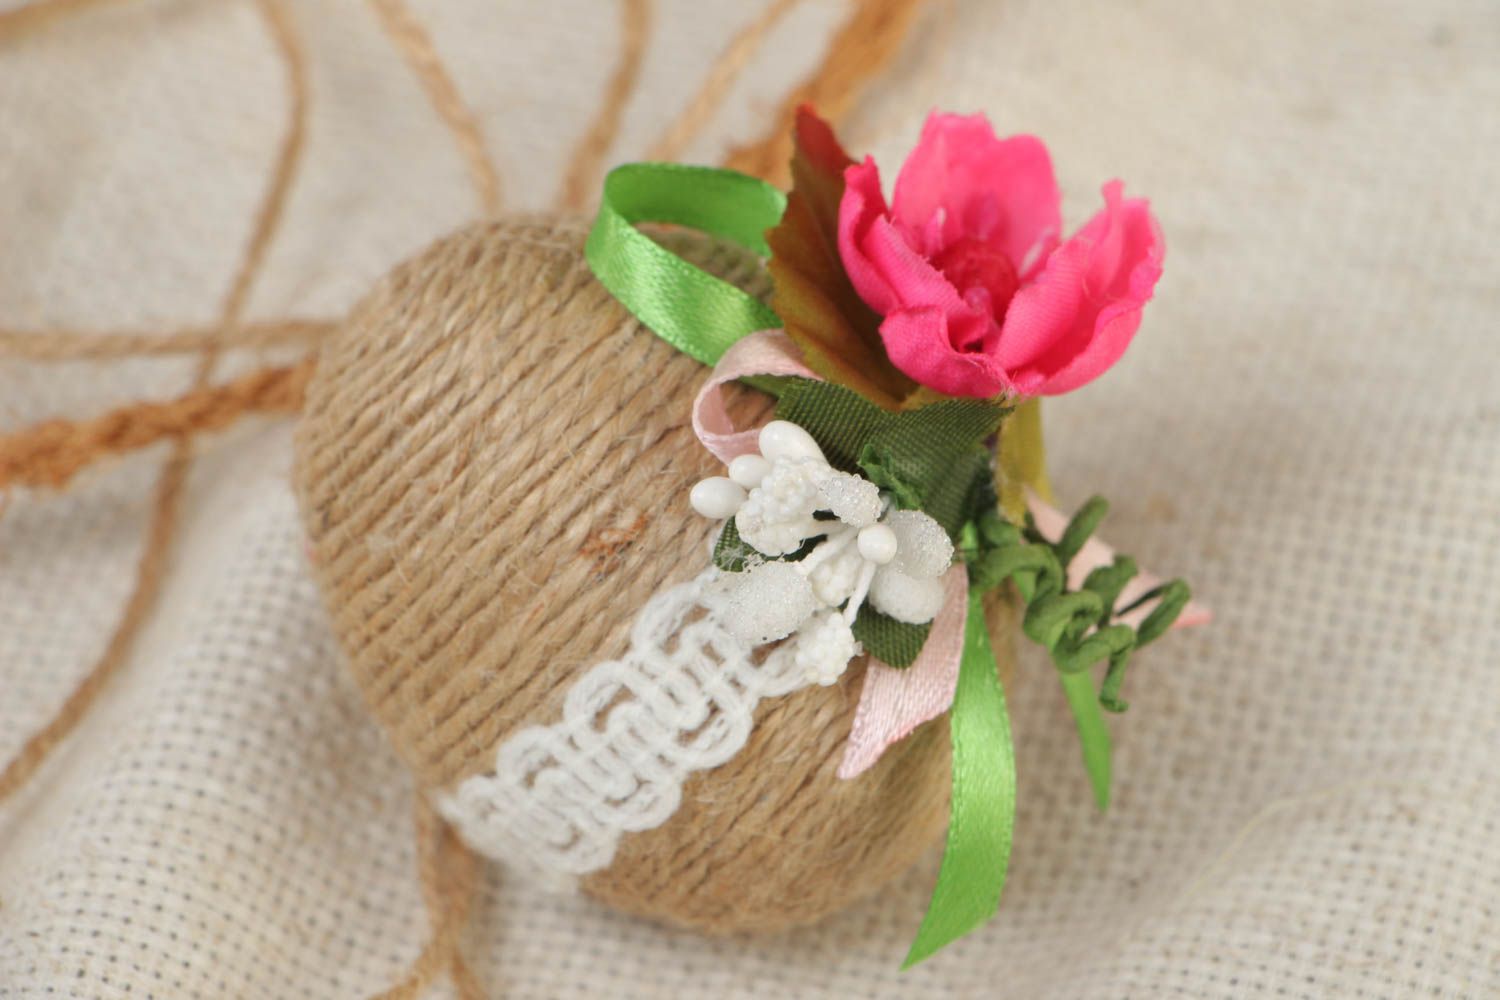 Handmade decorative wooden egg wrapped with twine with flowers for home decor photo 1